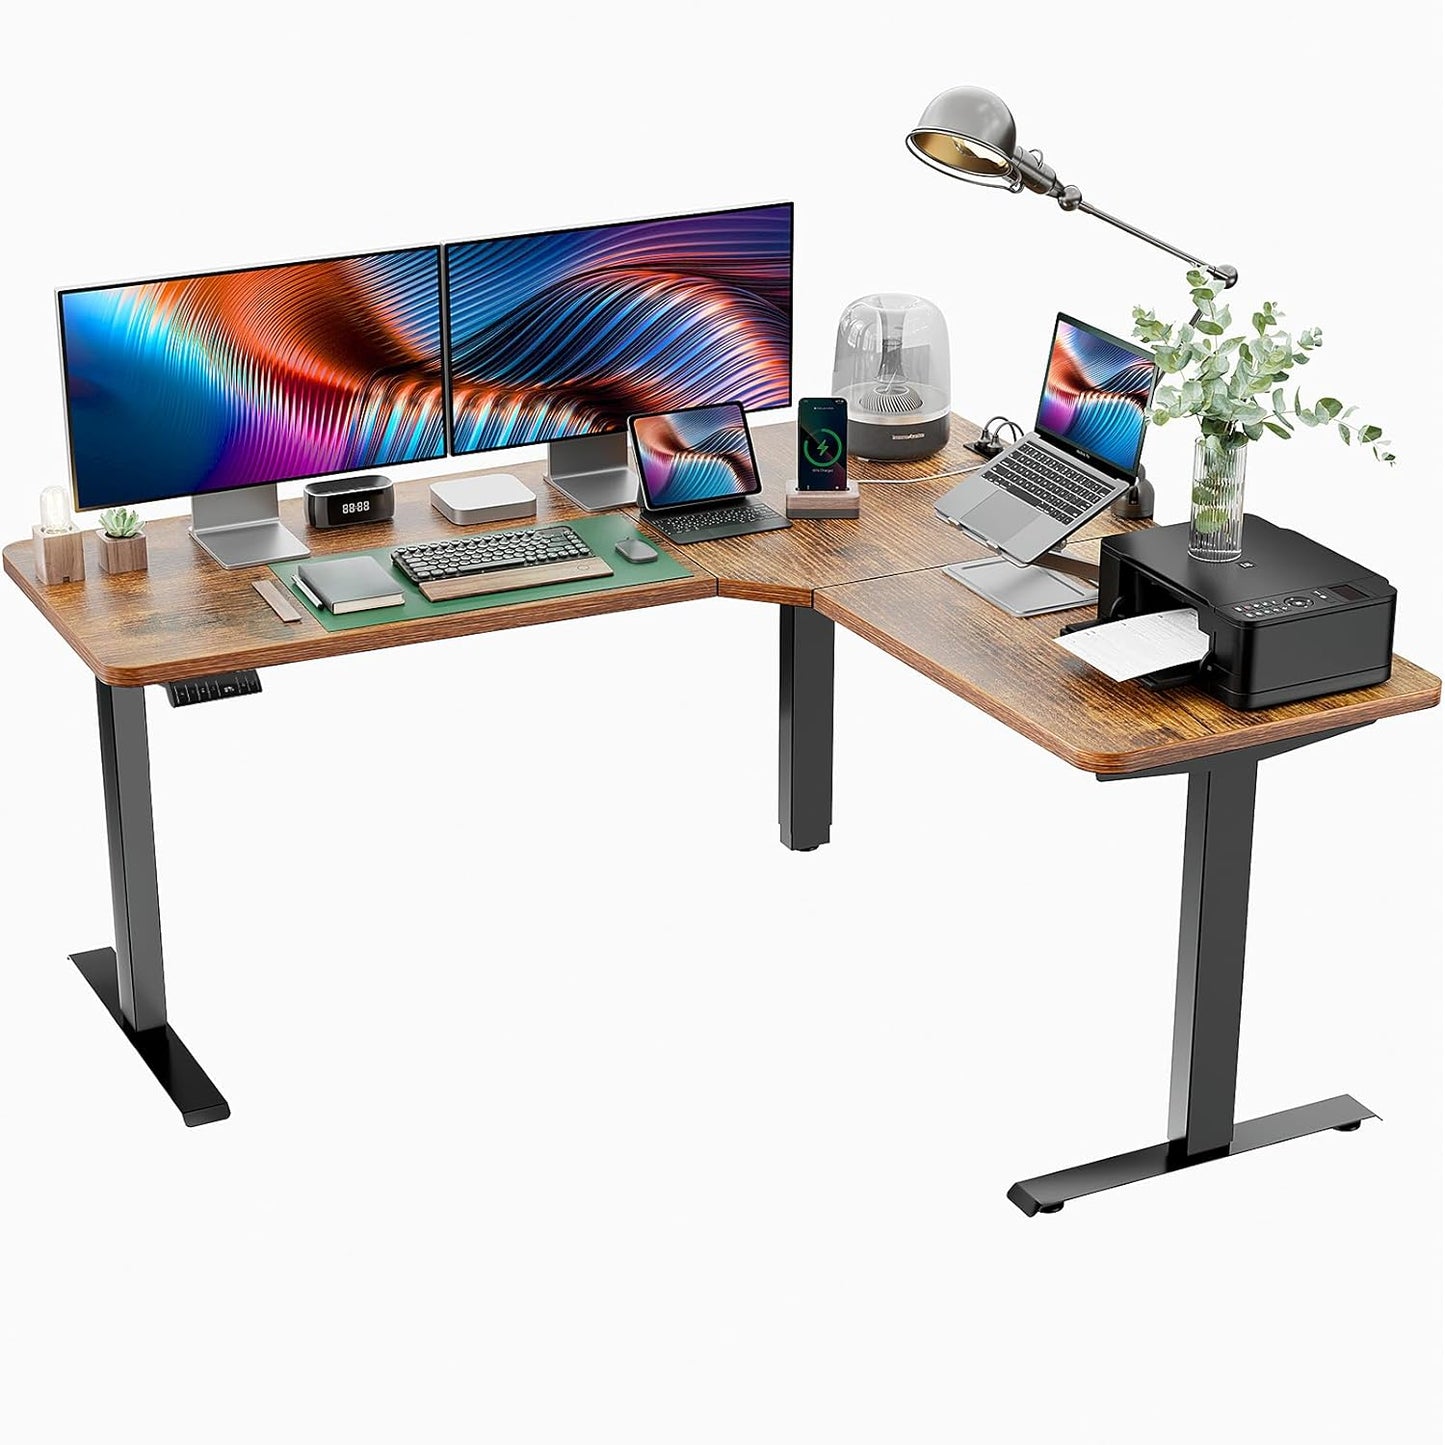 Corner Stand up Desk Adjustable Height with 4-In 1 Electical Outlet - L Shaped Electric Standing Desk with Headphone Hook - Stand up Desk for Home Office Sturdy Writing Workstation Rustic